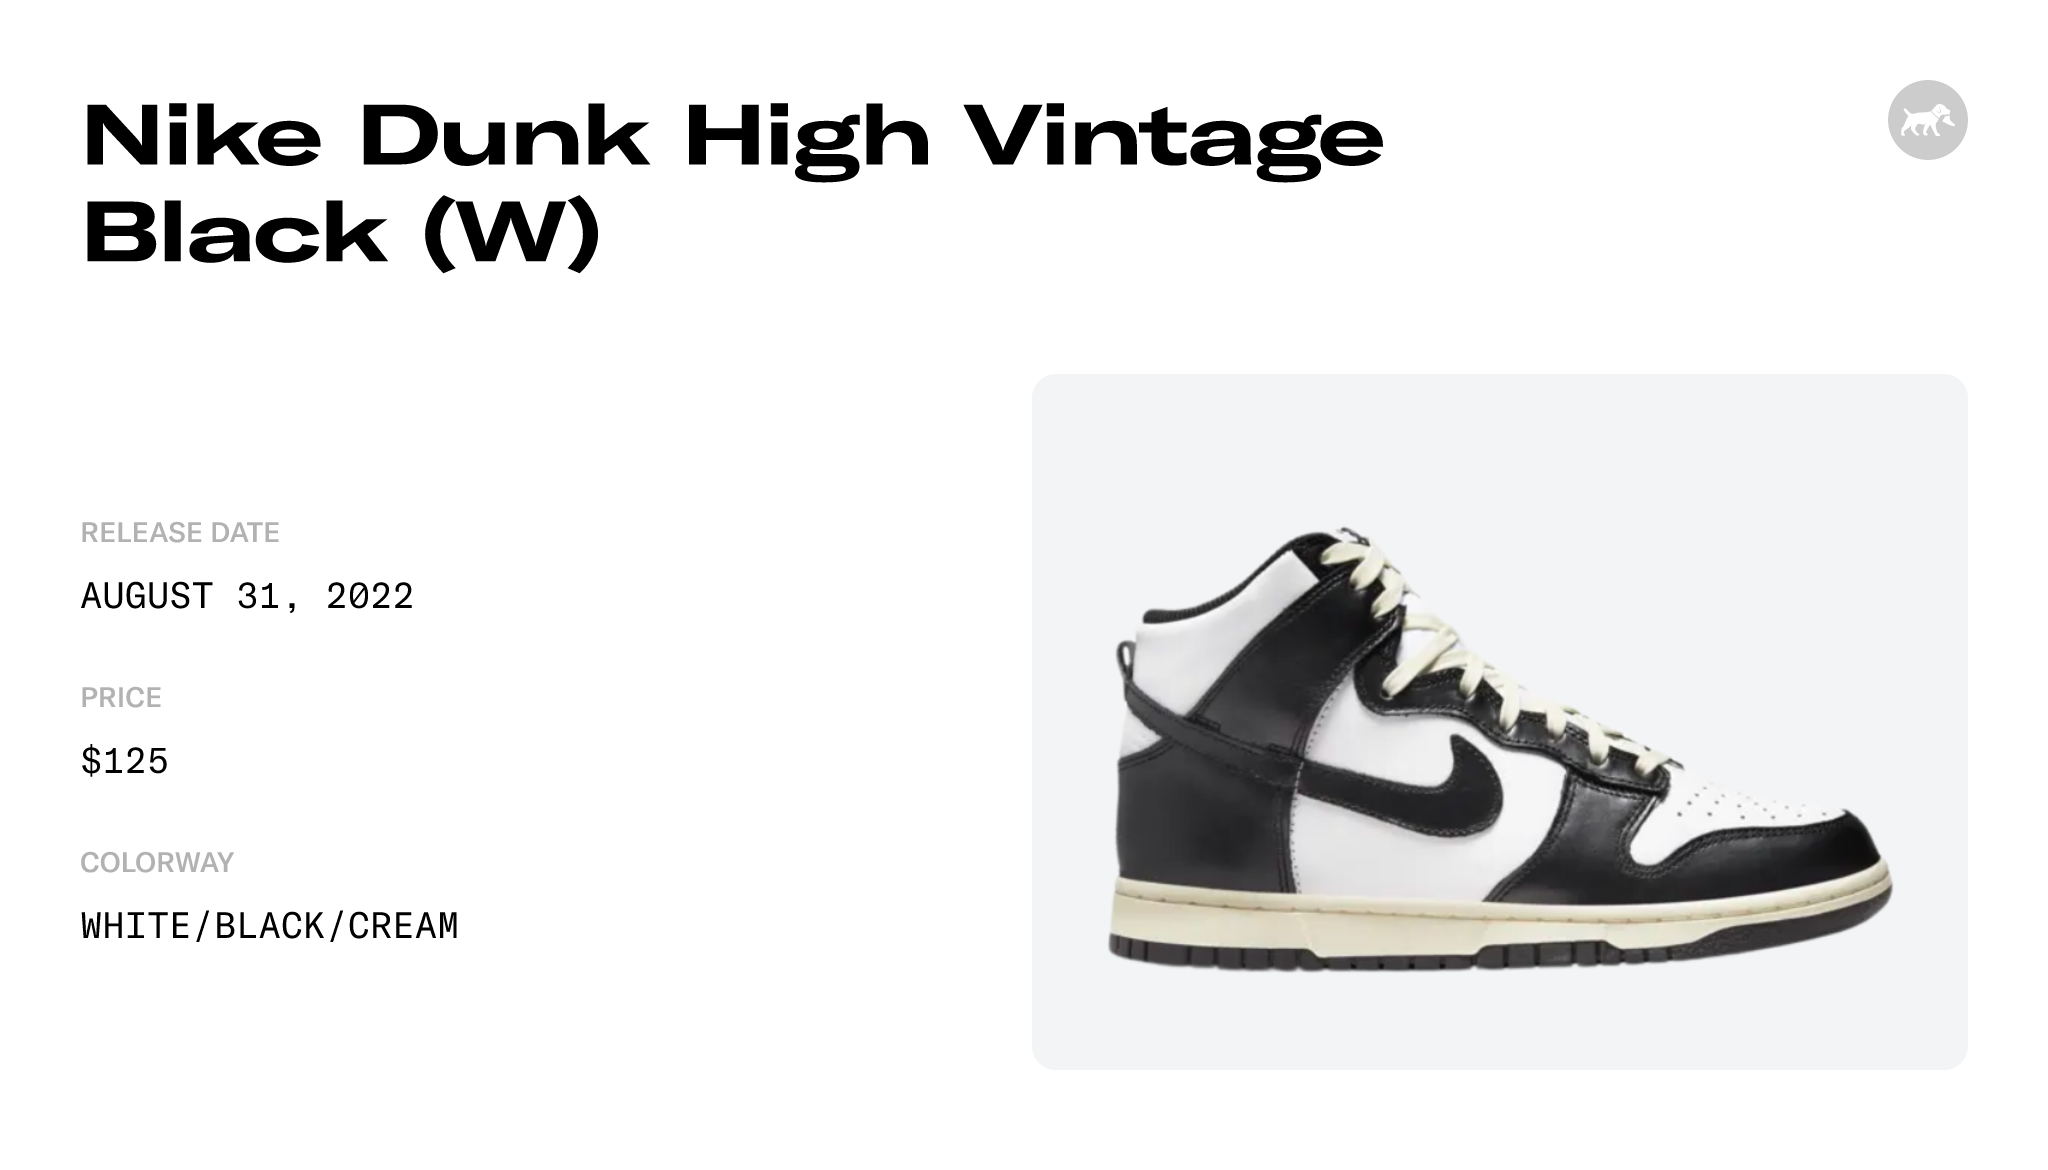 Nike Dunk High Vintage Black (W) - DQ8581-100 Raffles and Release Date